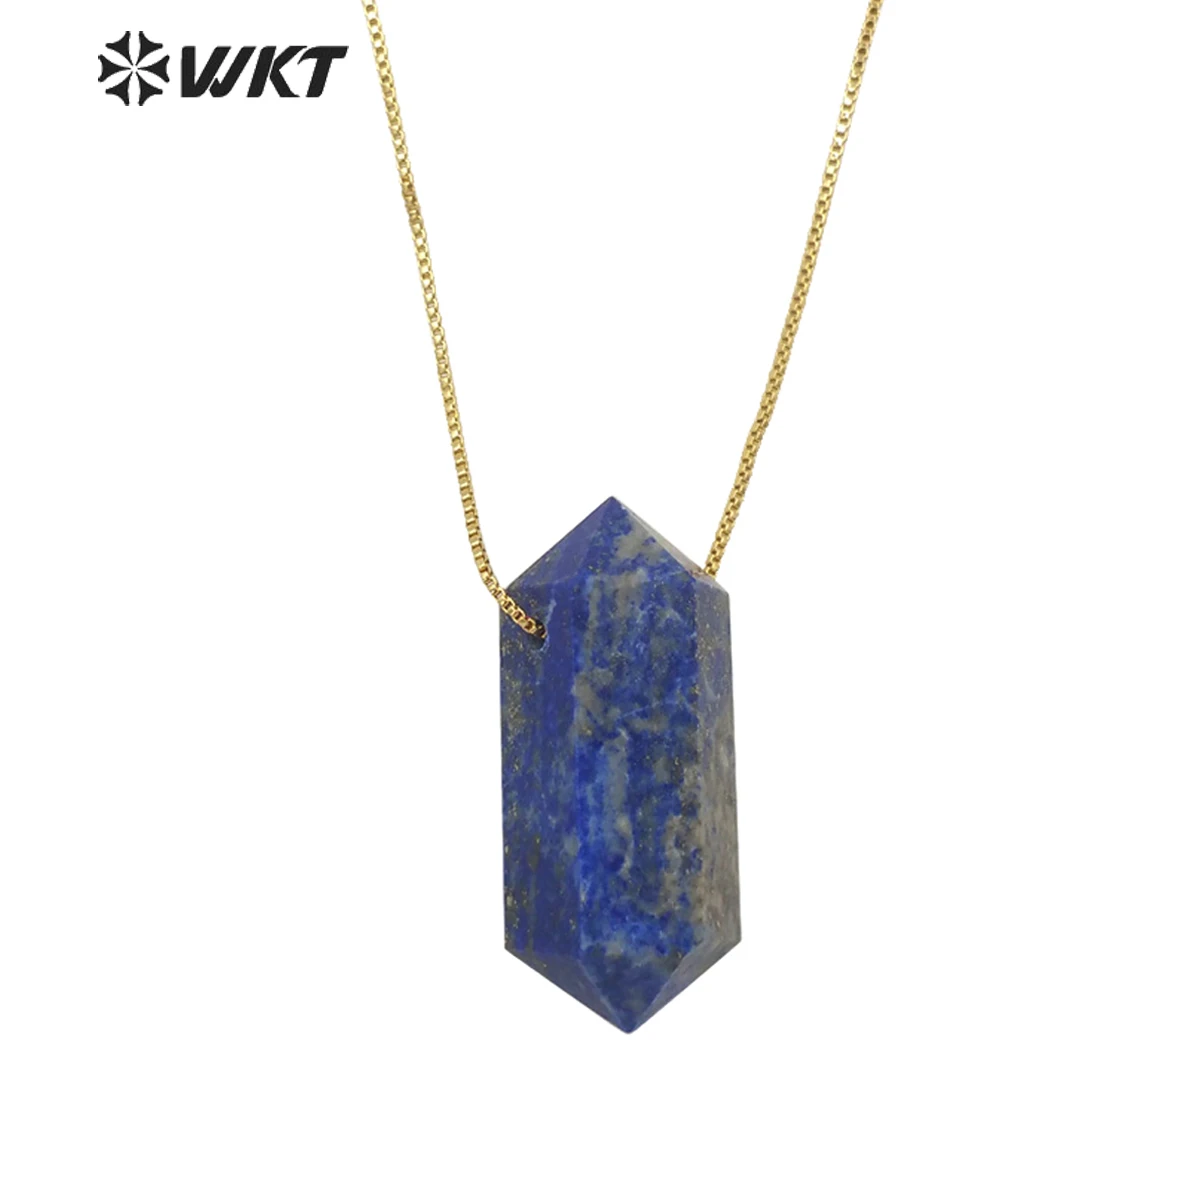 

WT-N1373 WKT Beautiful Natural Stone Necklace Hexagonal Cone Double Head Cylinder Four Colore Choice Pendant Girls Birthday Gift